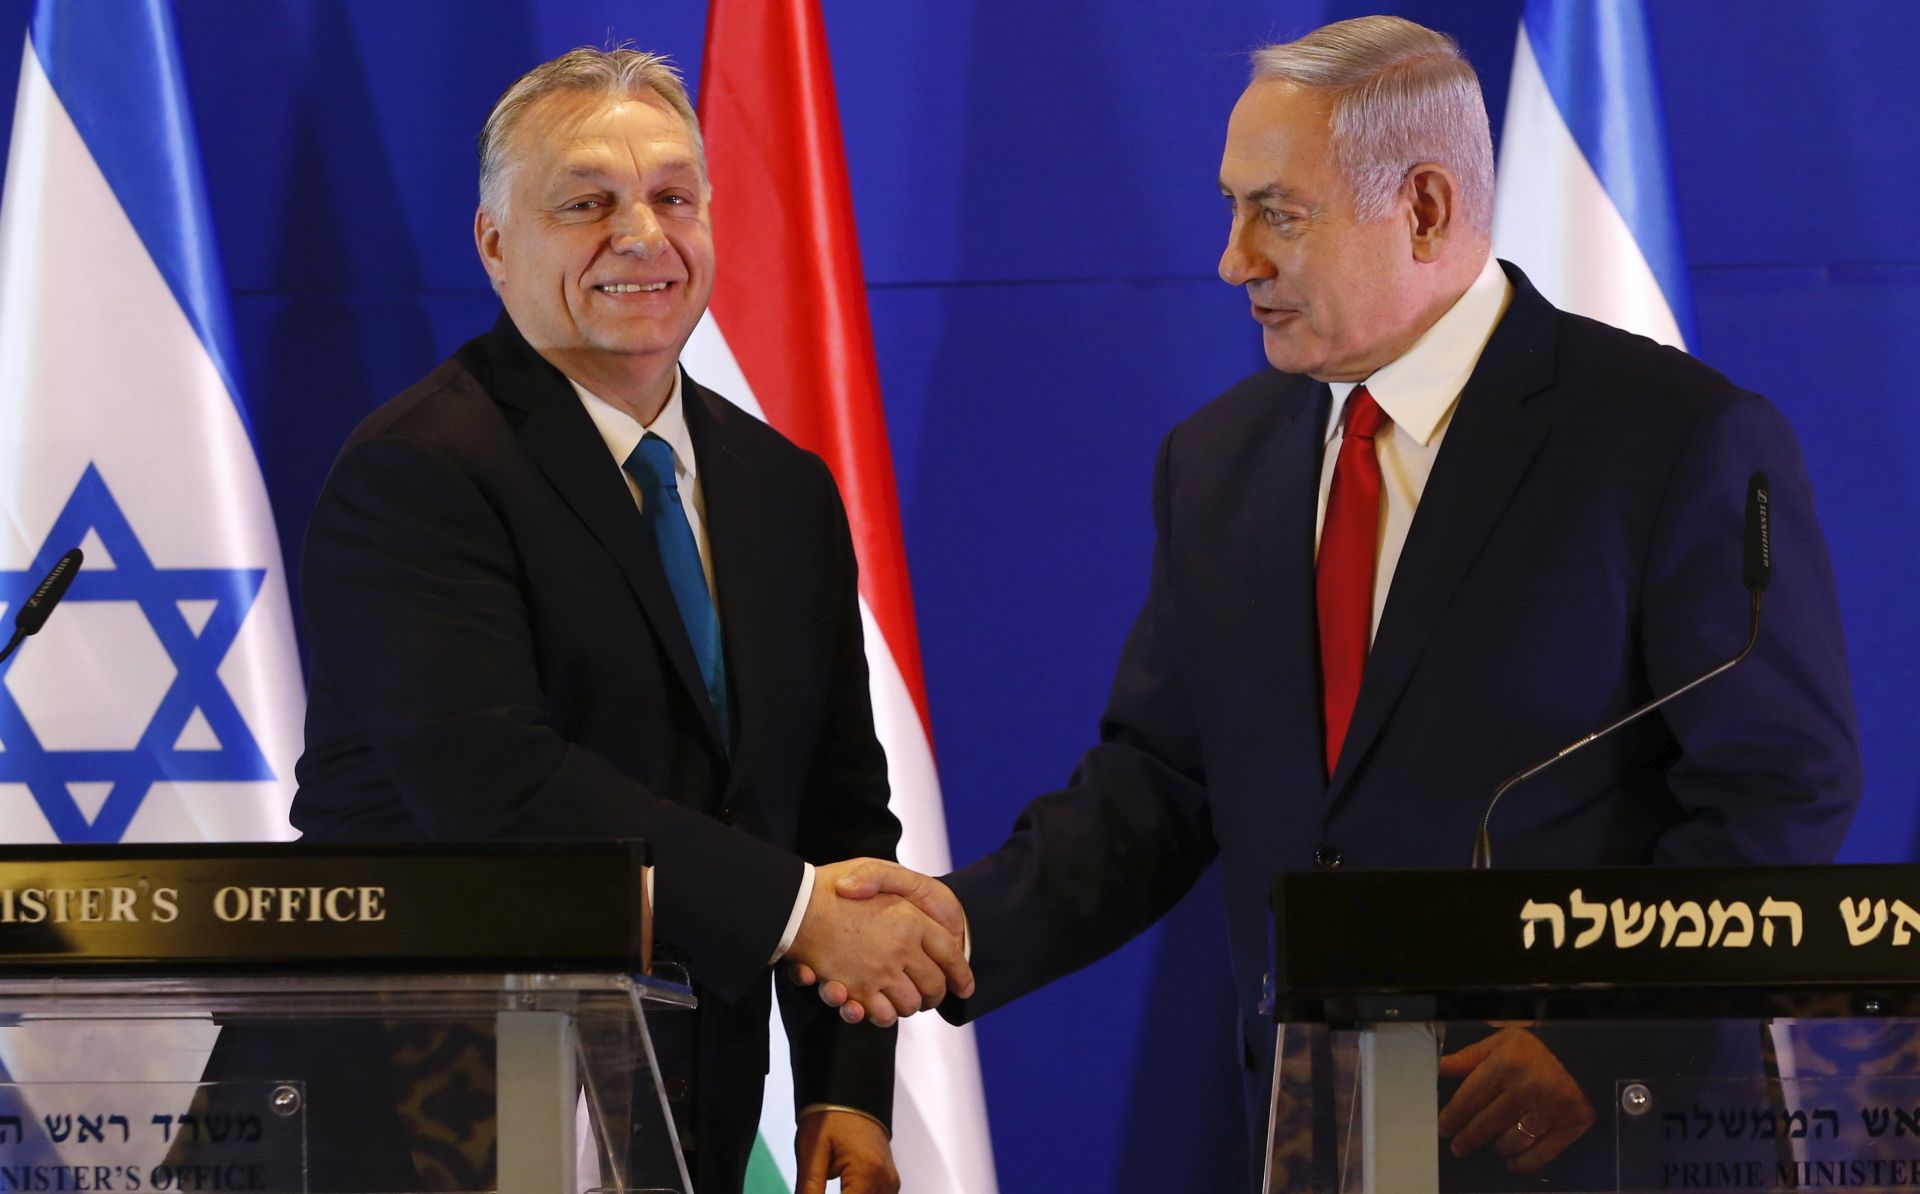 epa07380341 Hungarian Prime Minister Viktor Orban (L) and Israeli Prime Minister Benjamin Netanyahu attend a press conference after their meeting in Jerusalem, in Jerusalem, Israel, 19 February 2019. Viktor Orban is on an official visit in Israel.  EPA/ARIEL SCHALIT / POOL